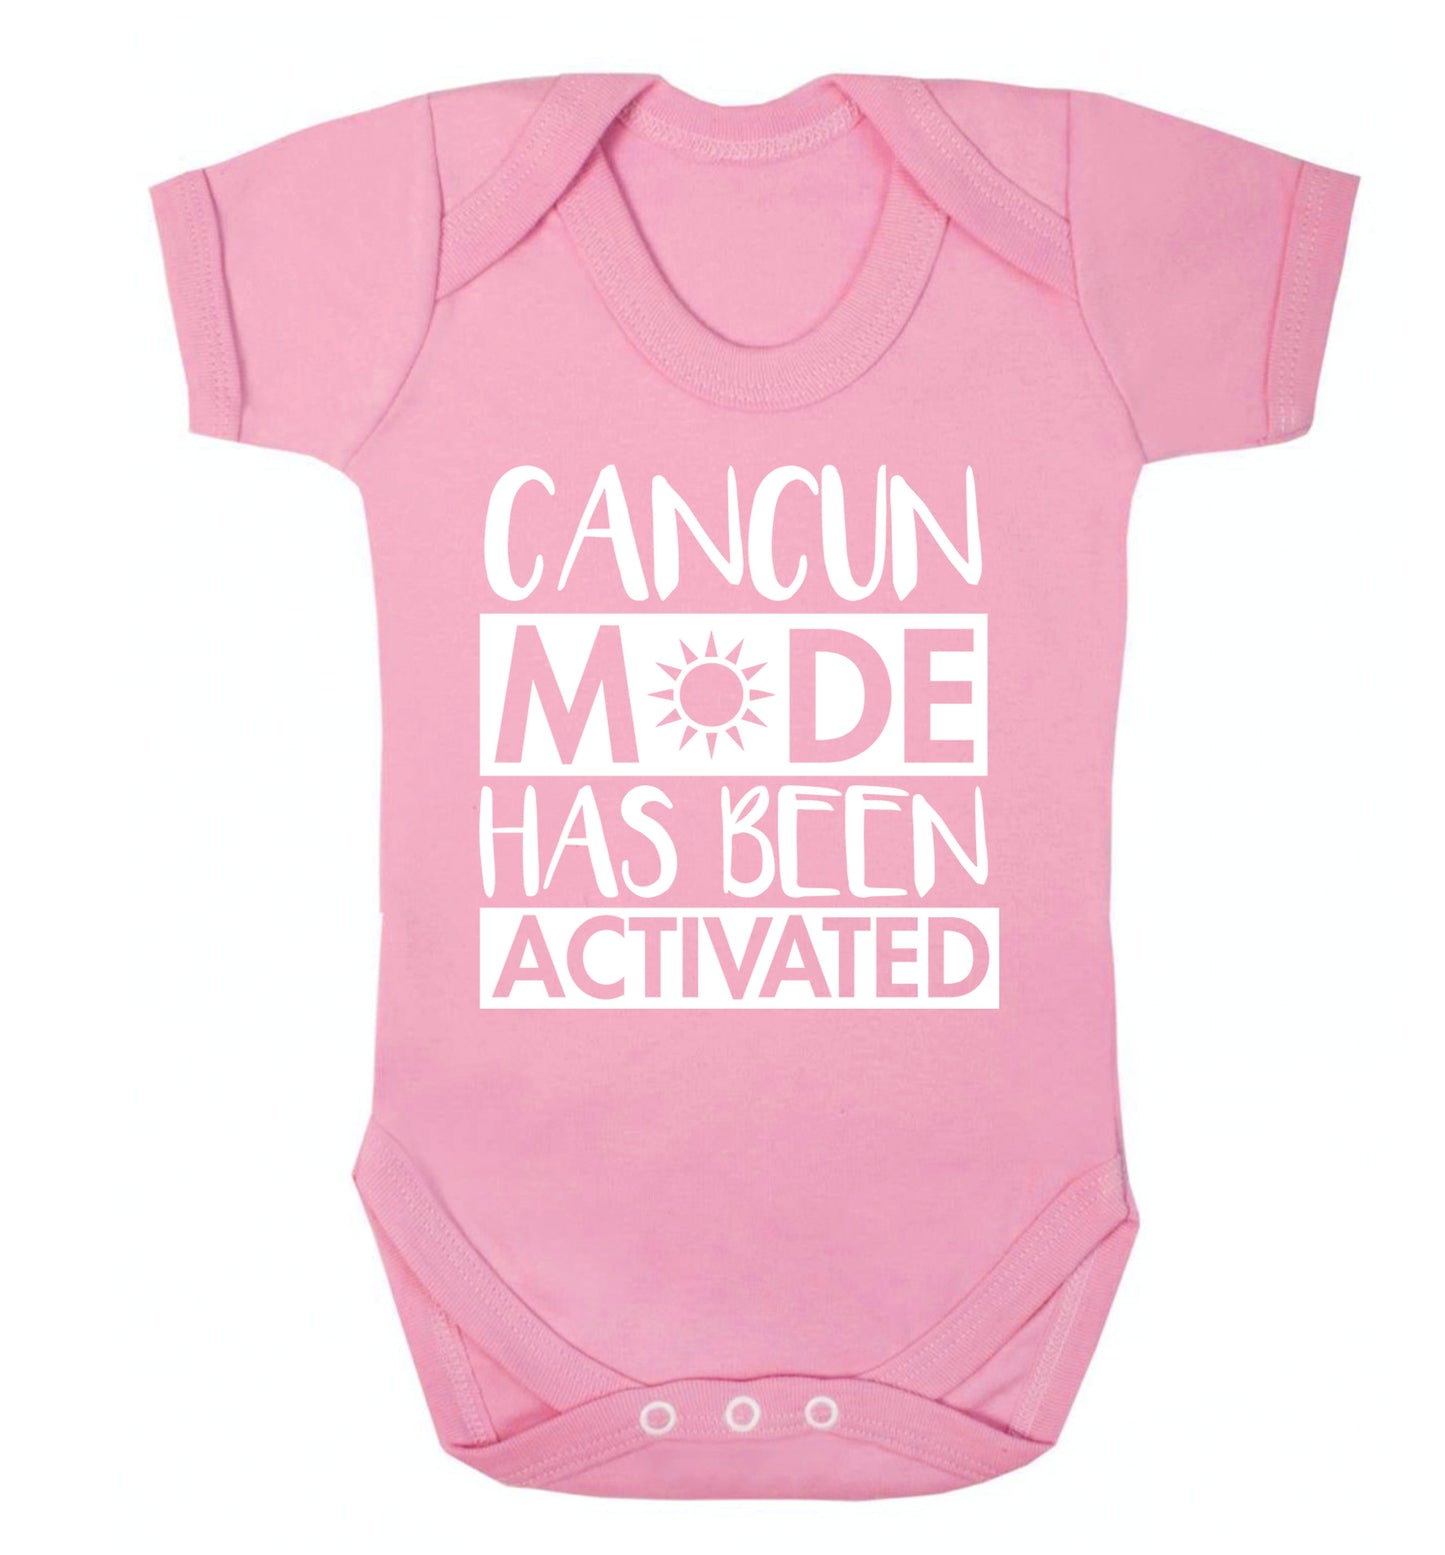 Cancun mode has been activated Baby Vest pale pink 18-24 months